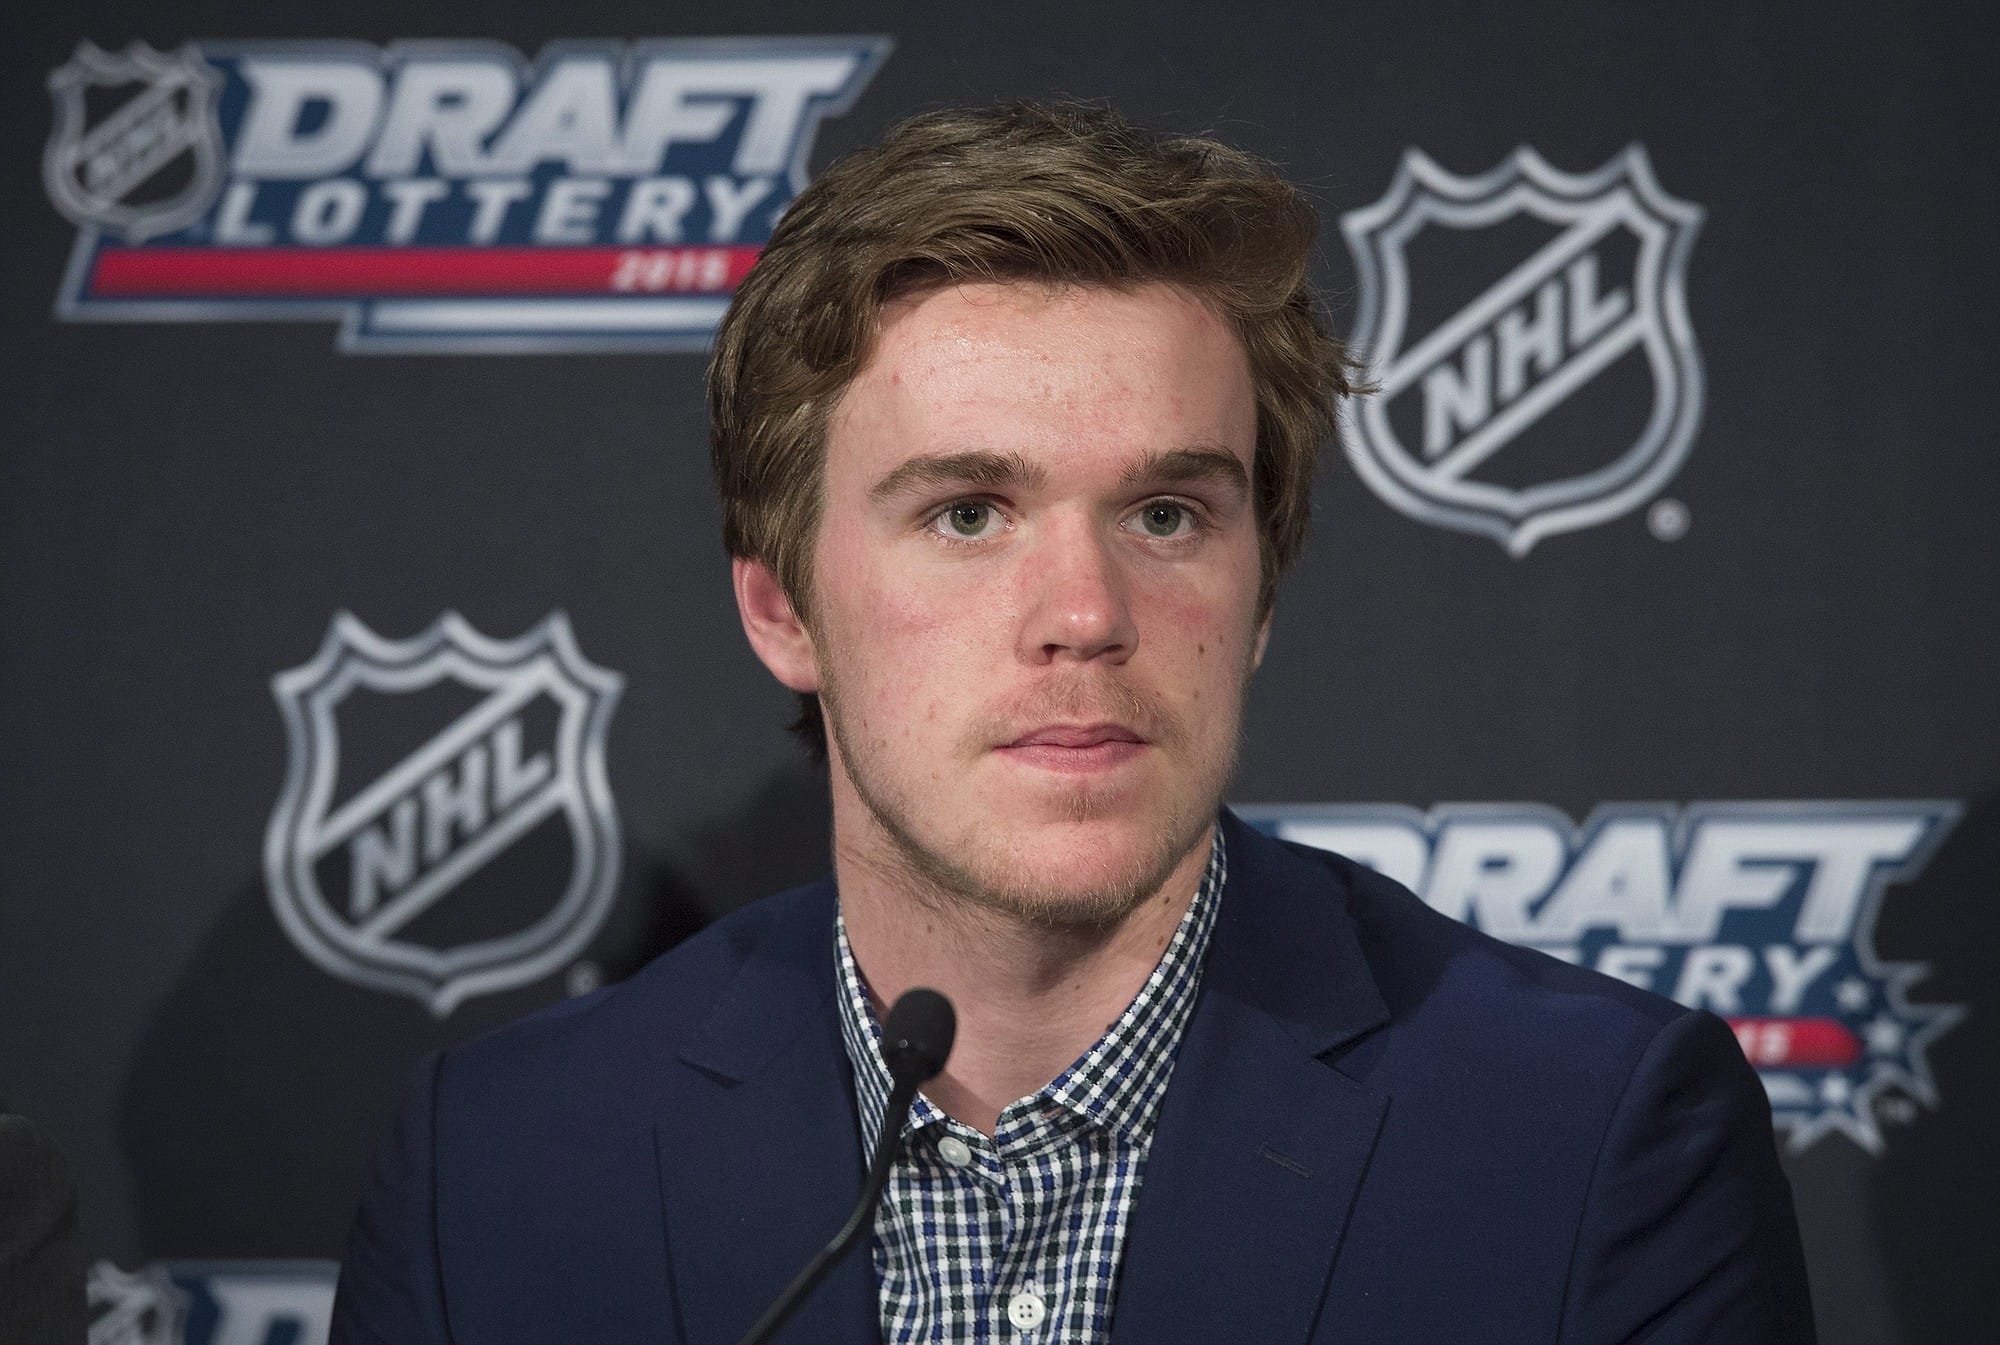 Connor McDavid speaks to reporters in Toronto on Saturday, April 18, 2015. The Edmonton Oilers have won the NHL draft lottery and the right to select Connor McDavid with the first pick in the draft.